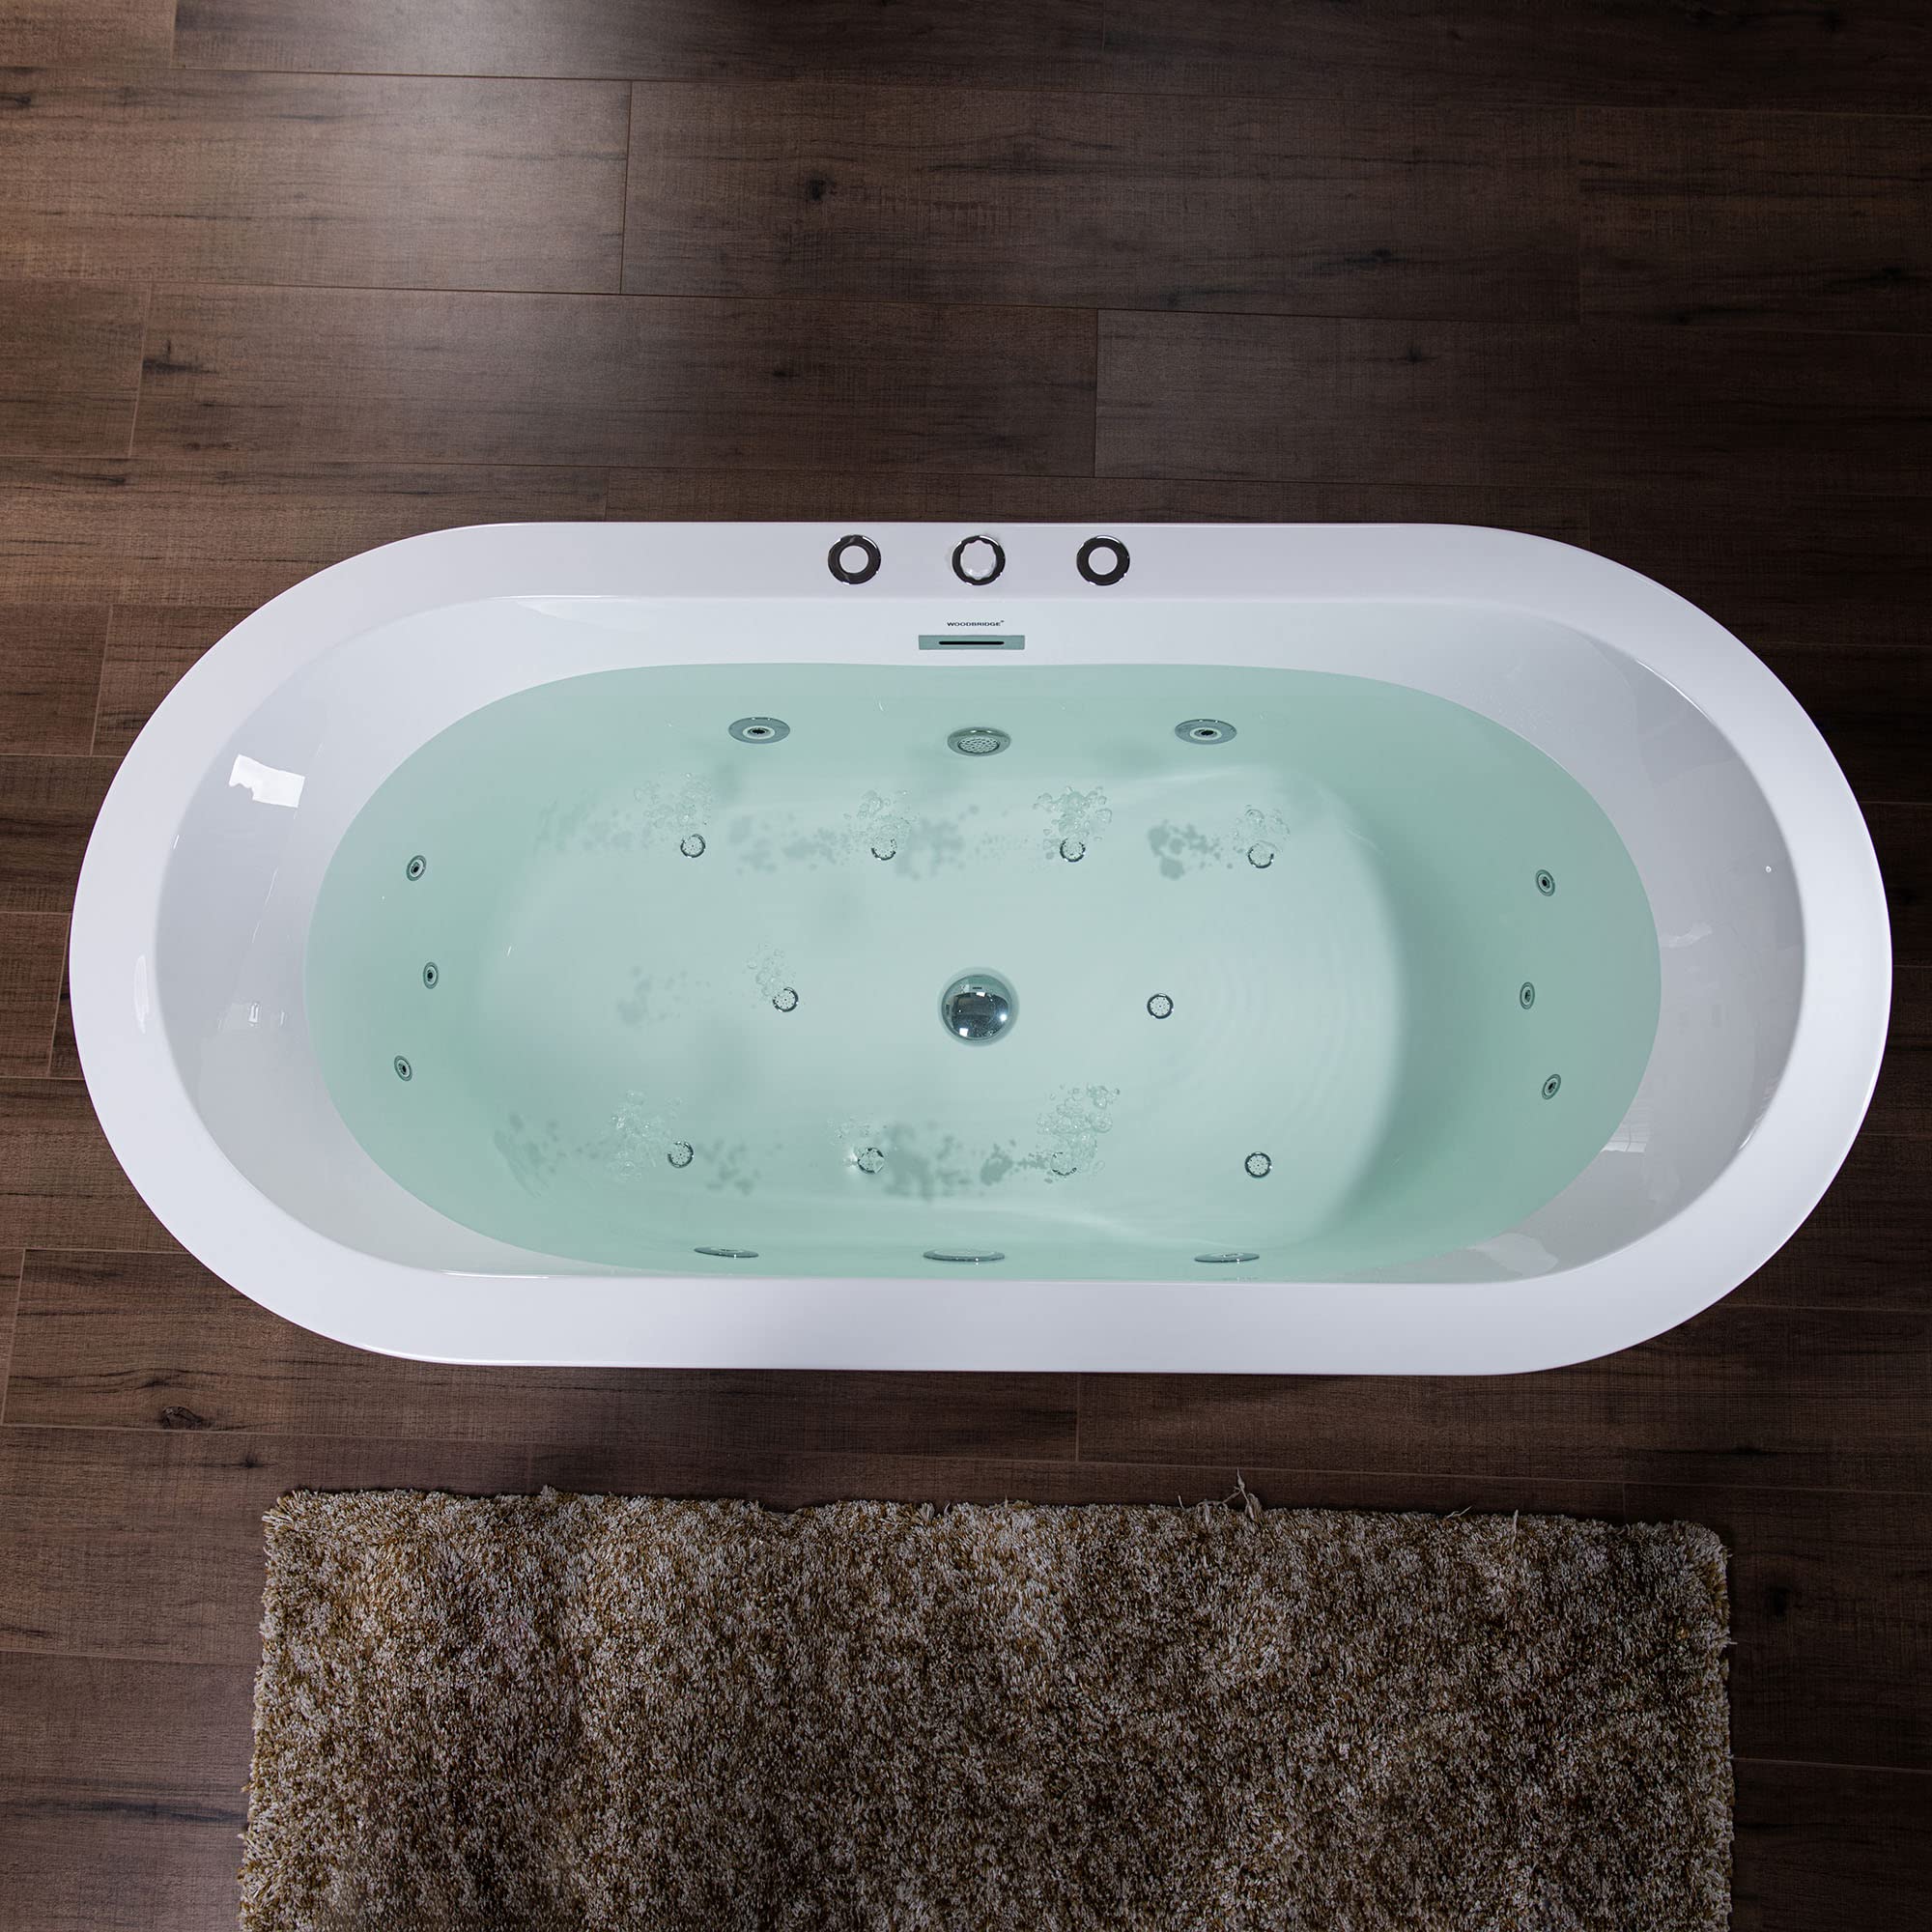 WOODBRIDGE 66-1/2" x 31-7/8" Whirlpool Water Jetted and Air Bubble Freestanding Heated Soaking Combination Bathtub, BJ200